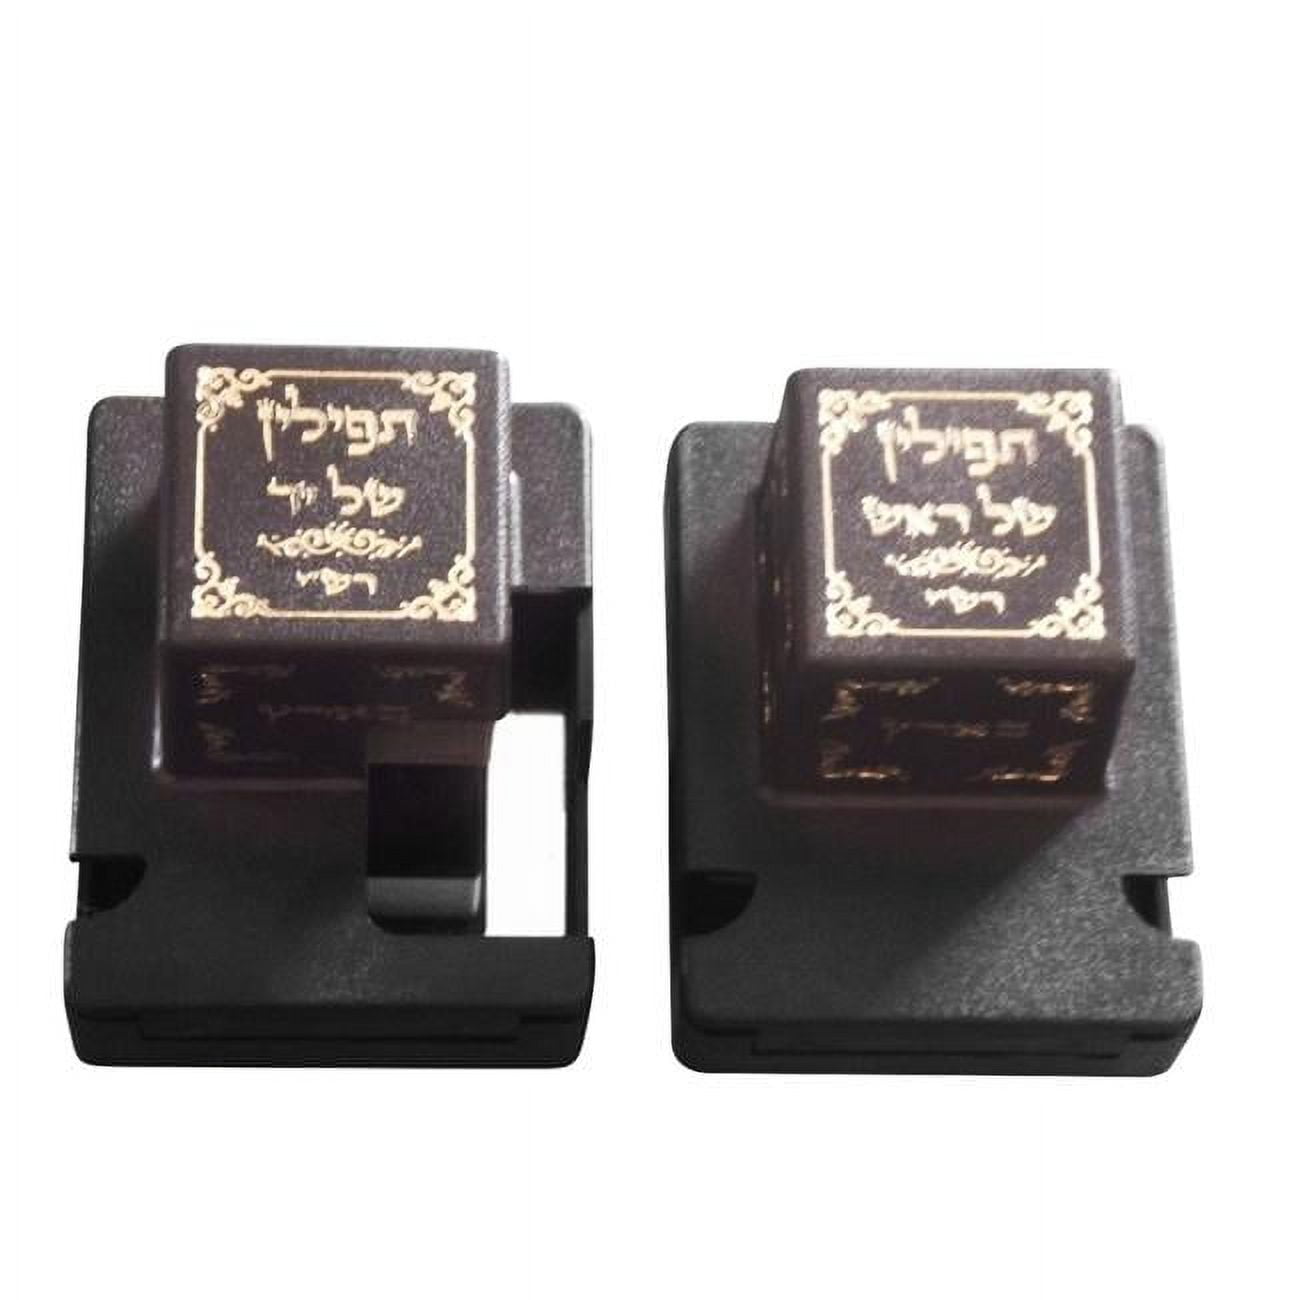 Picture of AM Judaica TBBTR34 Black Rabeinu Tam Righty Tefillin Box - Size 34